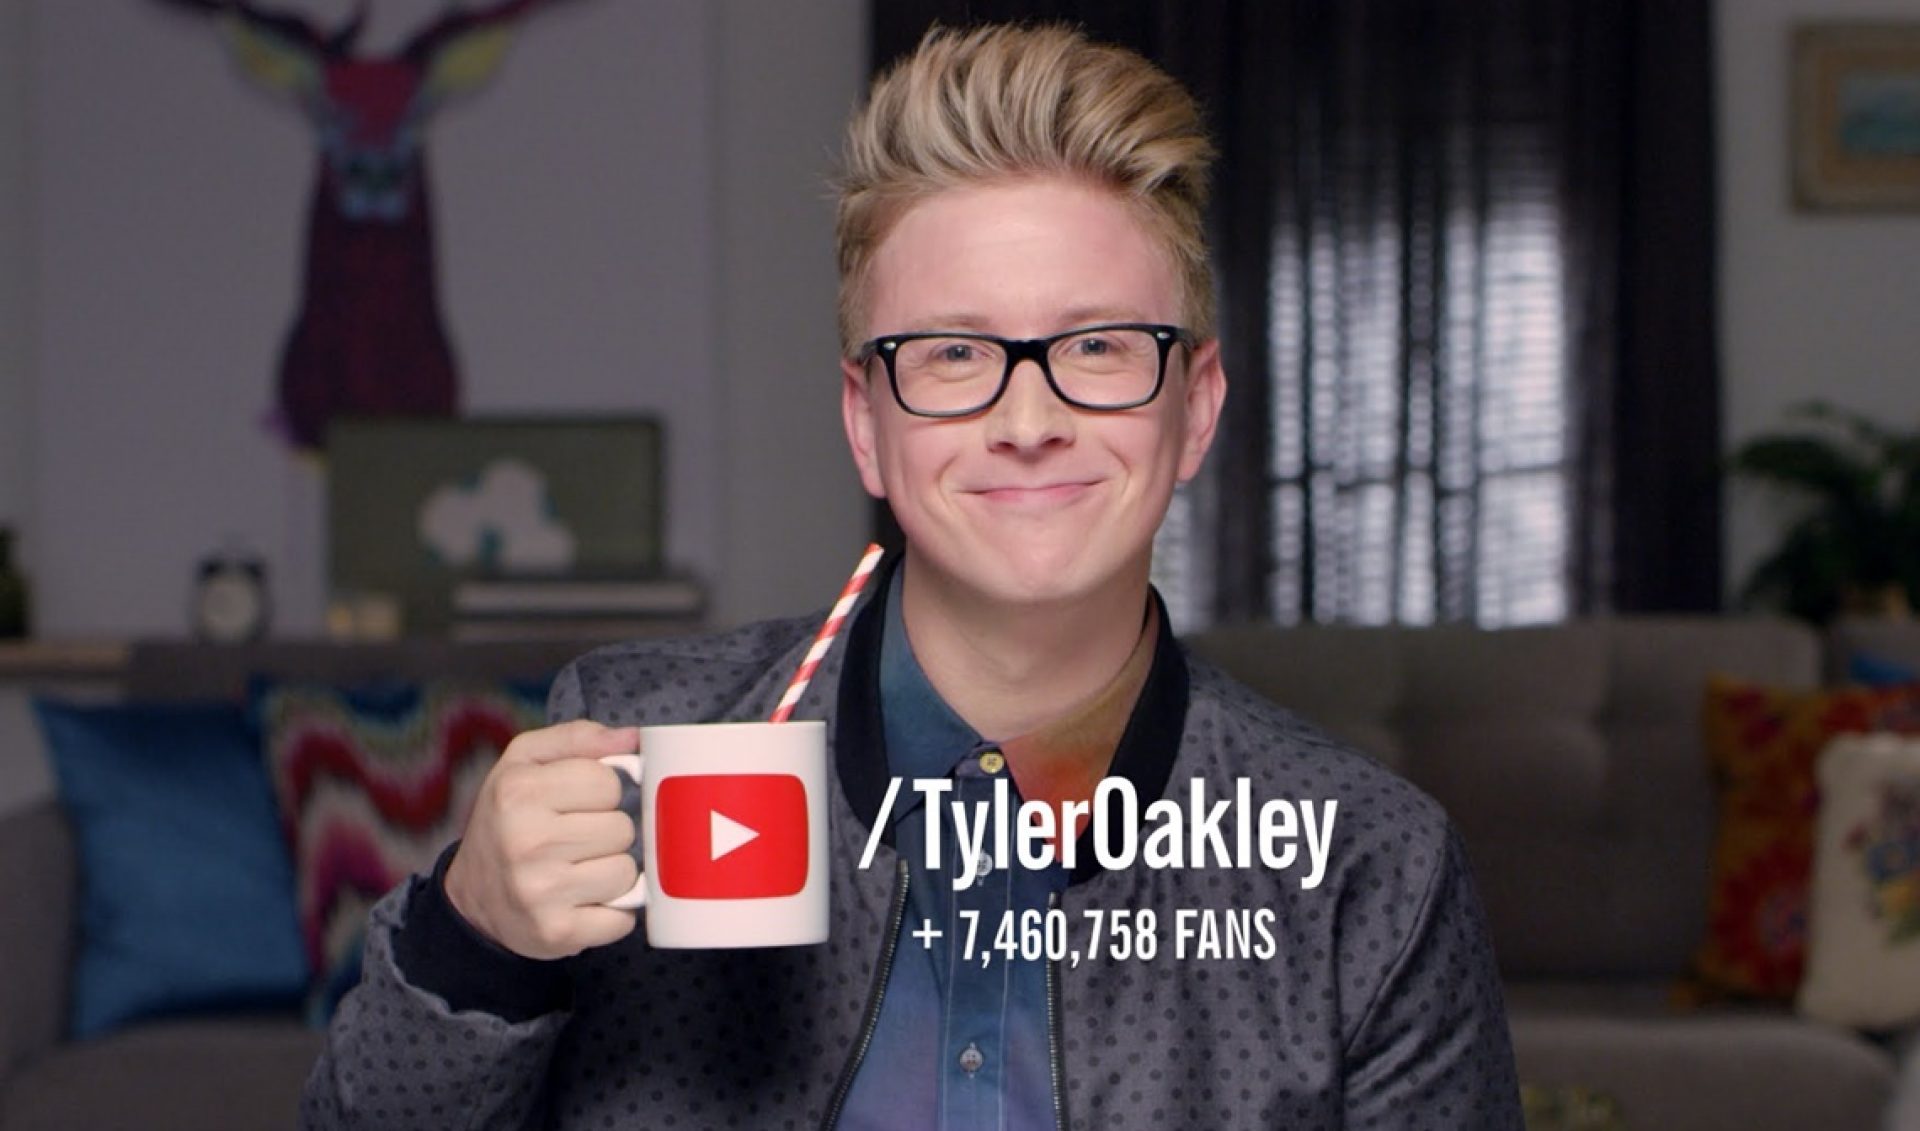 The Season 28 Cast Of ‘The Amazing Race’ Features Tyler Oakley, Burnie Burns, And More Digital Media Stars